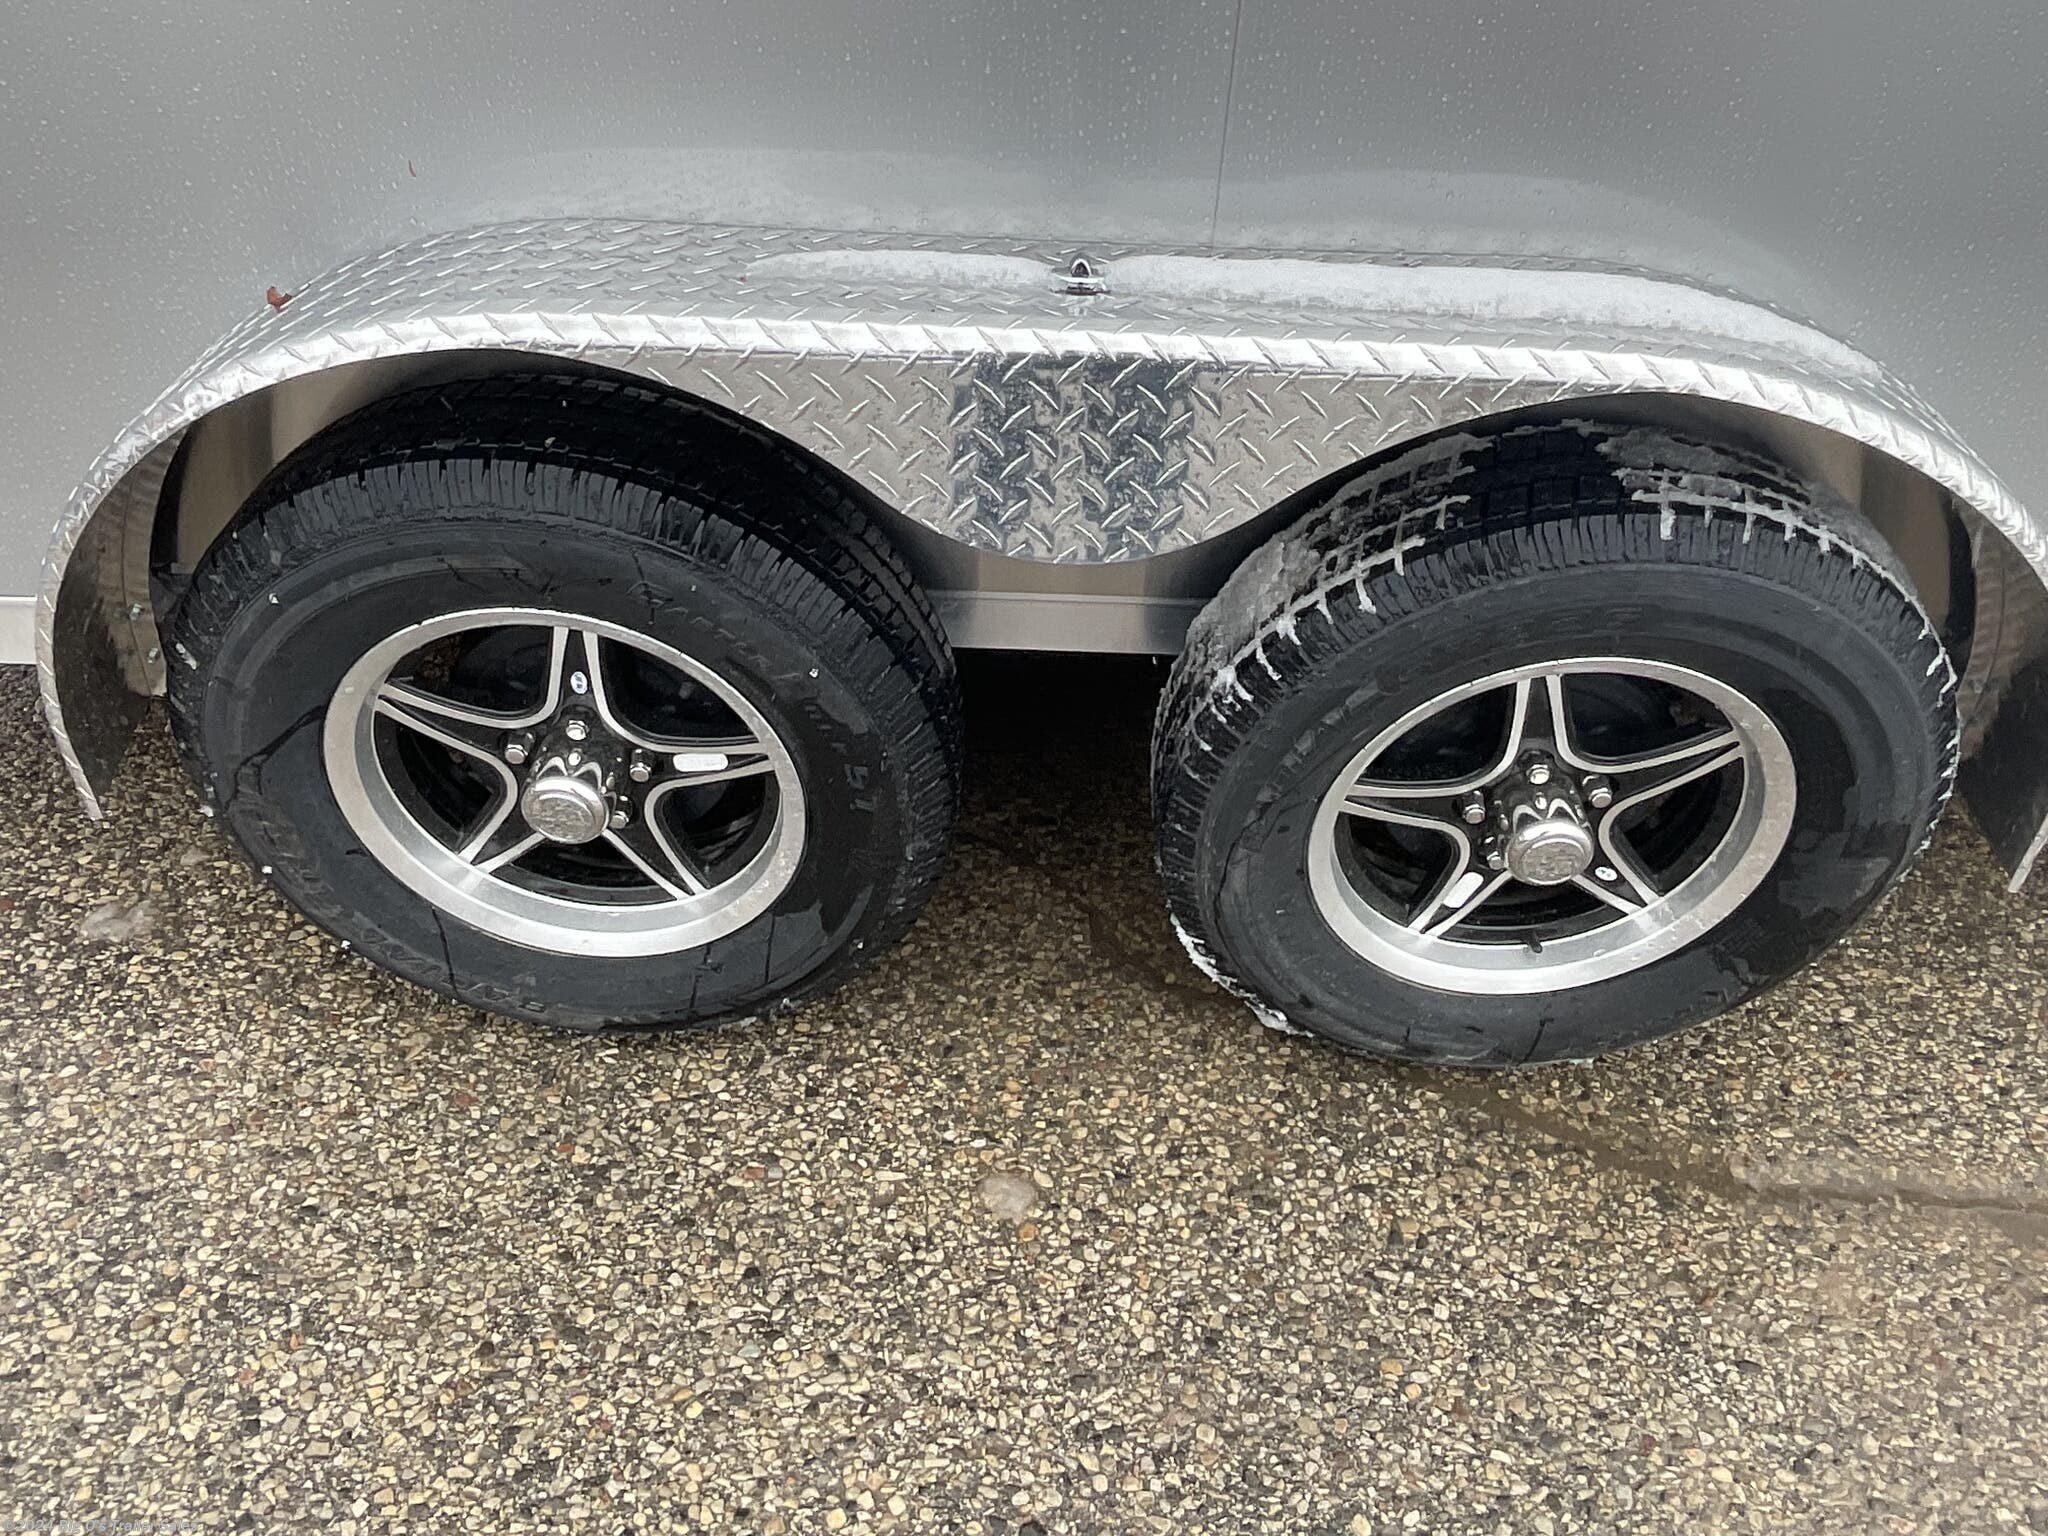 Aluminum wheel option with stainless steel cam bars, a $585 option